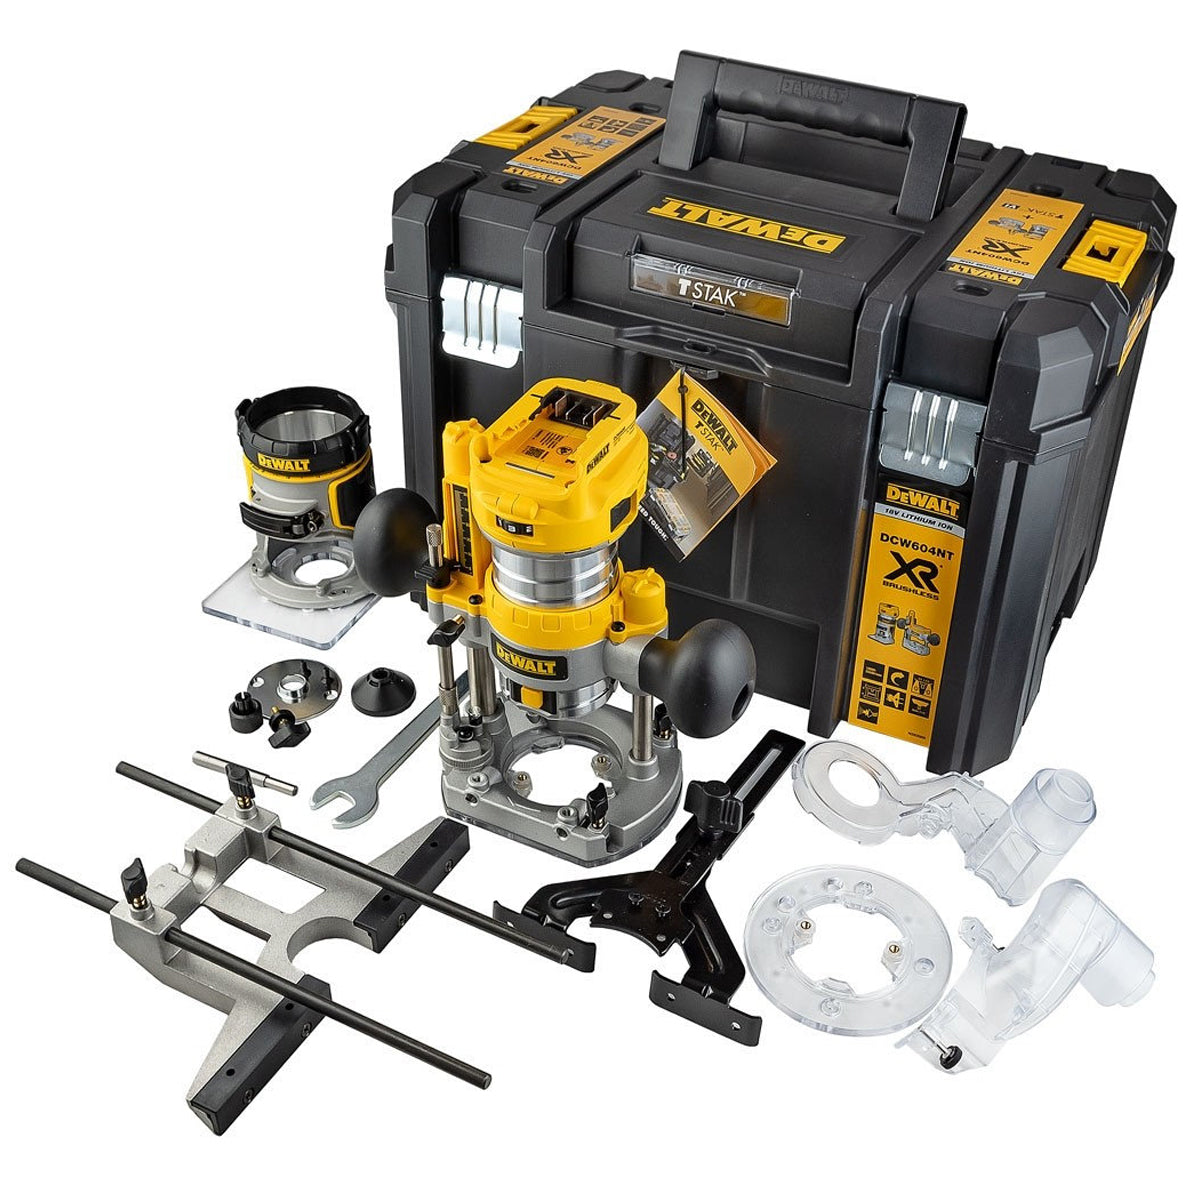 Dewalt DCW604NT 18V XR Brushless Router Trimmer with 1 x 4.0Ah Battery & Charger